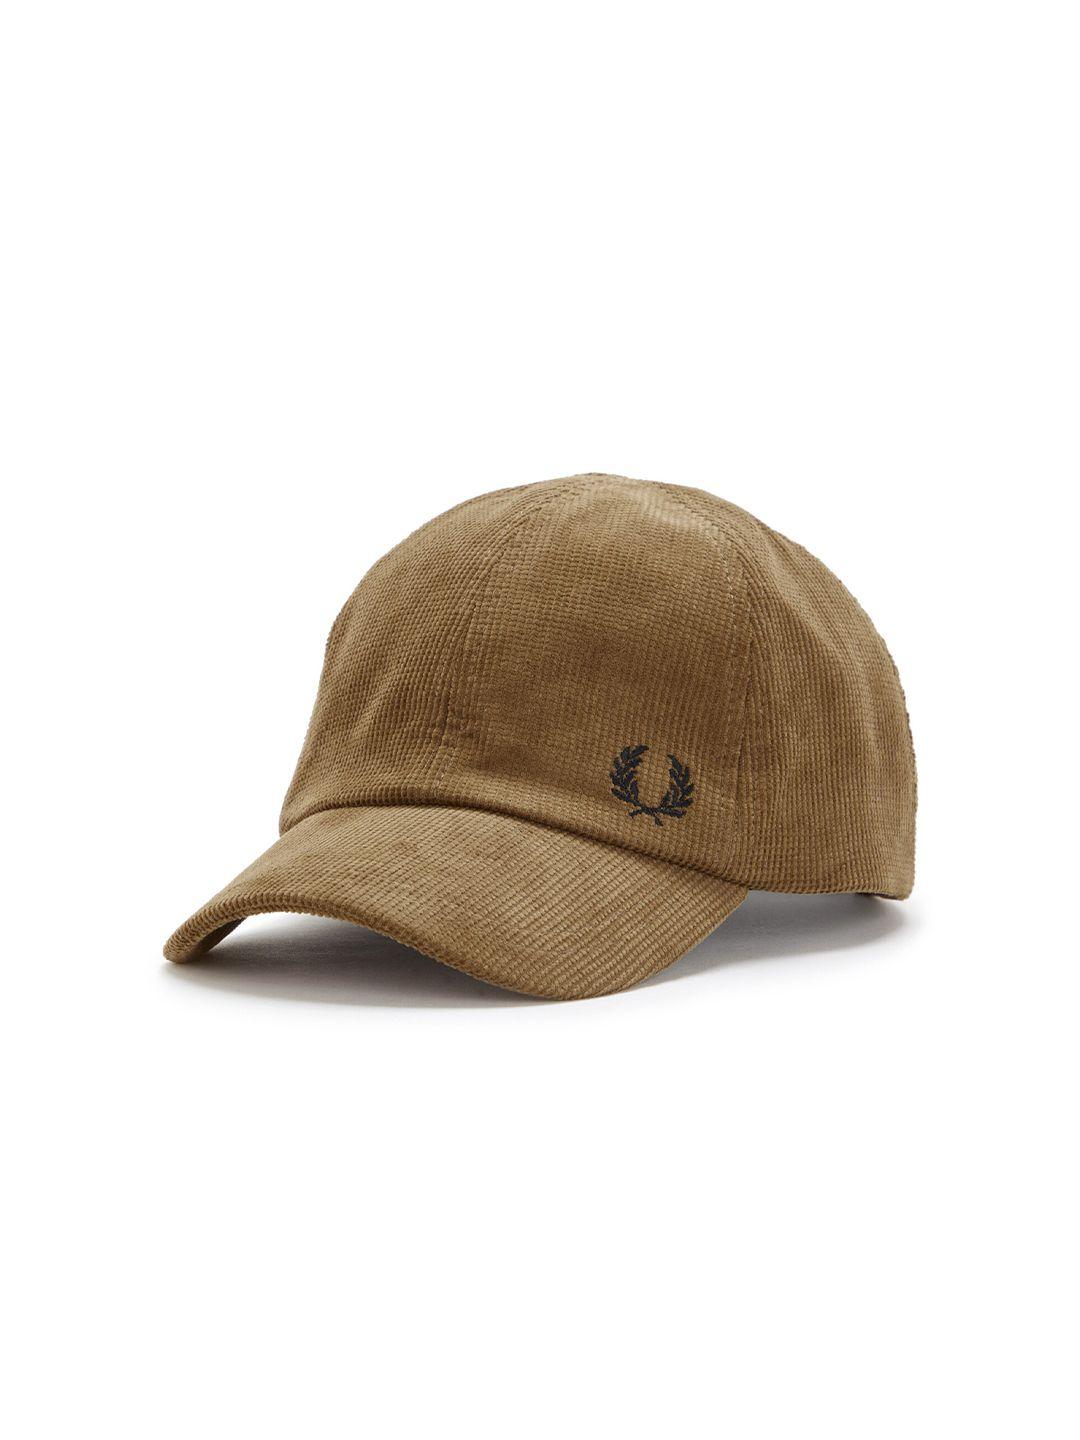 fred perry men embroidered baseball cap